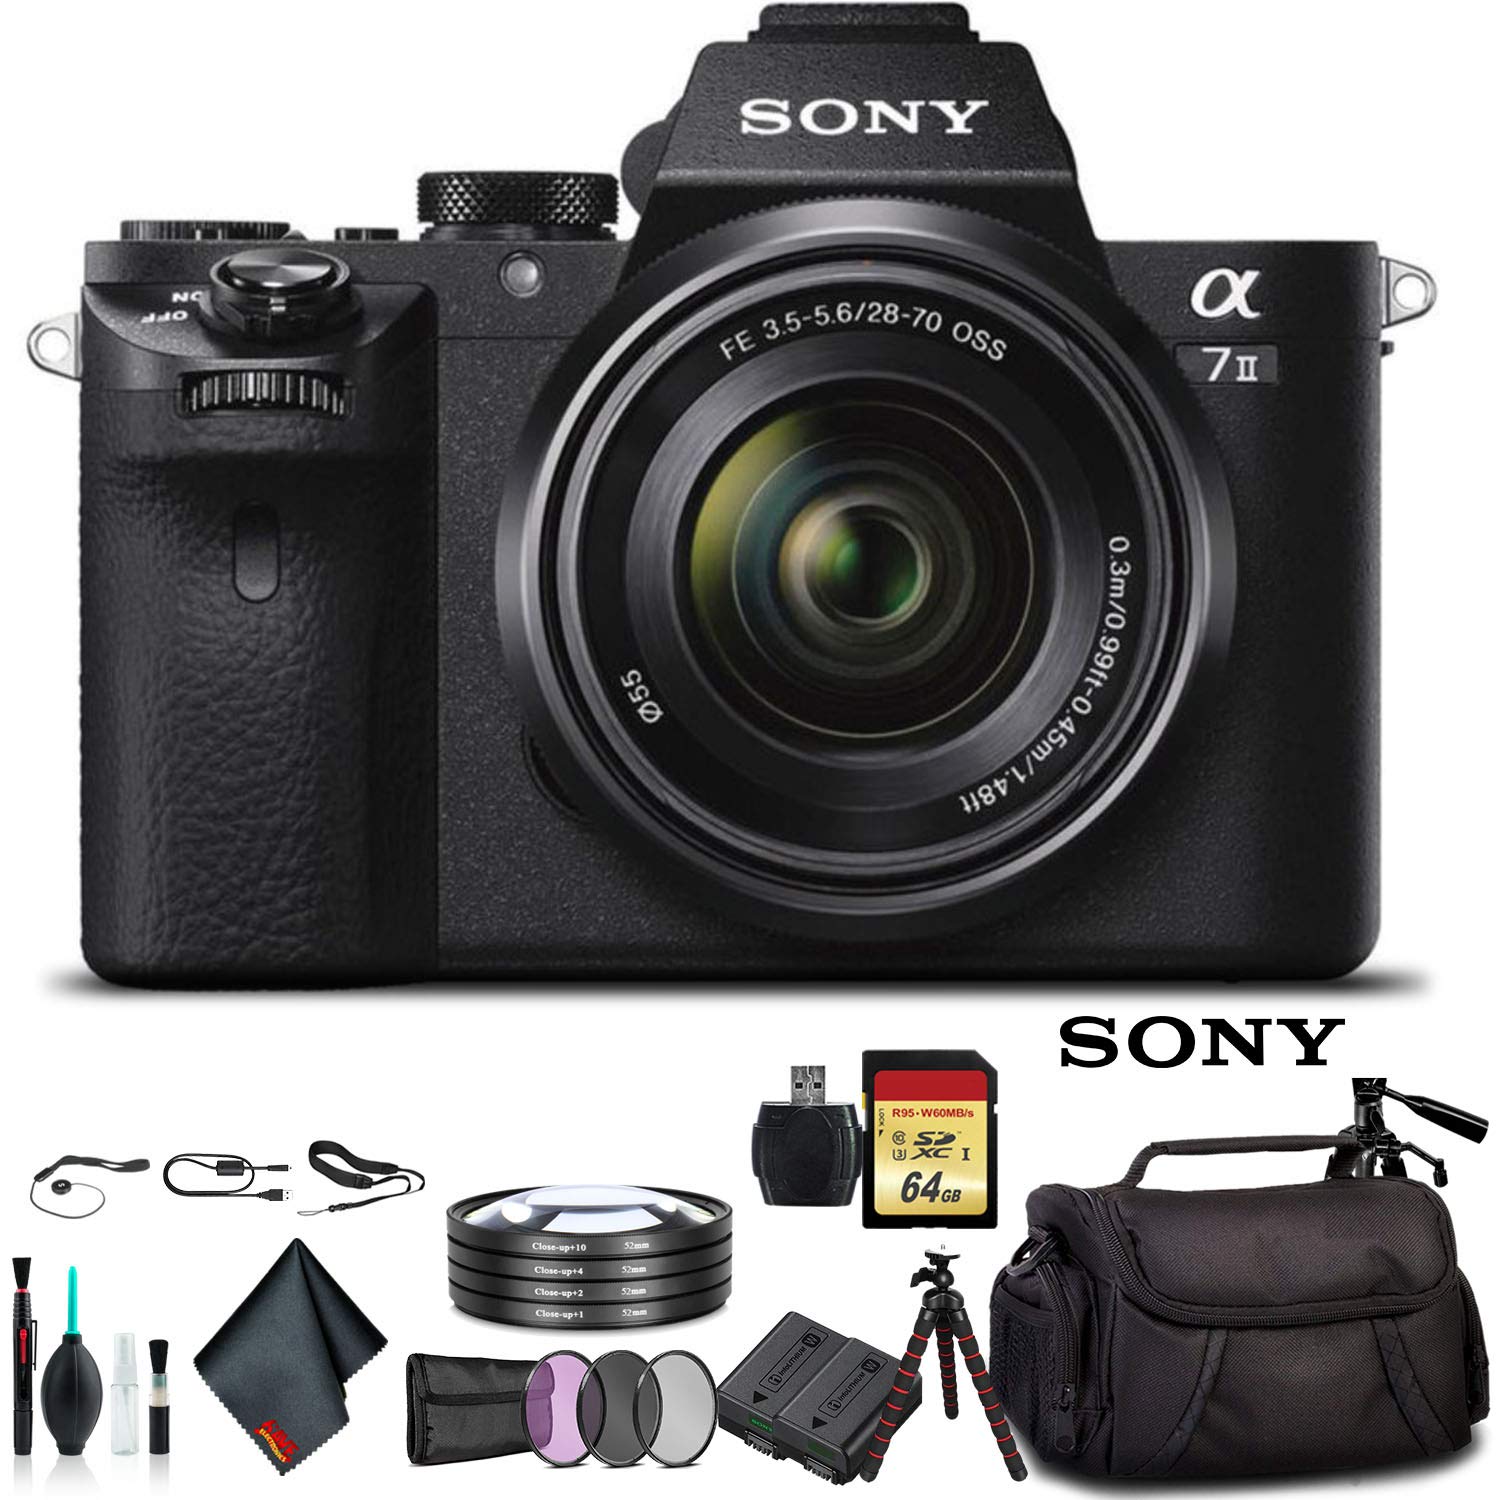 Sony Alpha a7 II Mirrorless Camera with FE 28-70mm f/3.5-5.6 OSS Lens ILCE7M2K/B With Soft Bag, Tripod, Additional Battery, 64GB Memory Card, Card Reader , Plus Essential Accessories